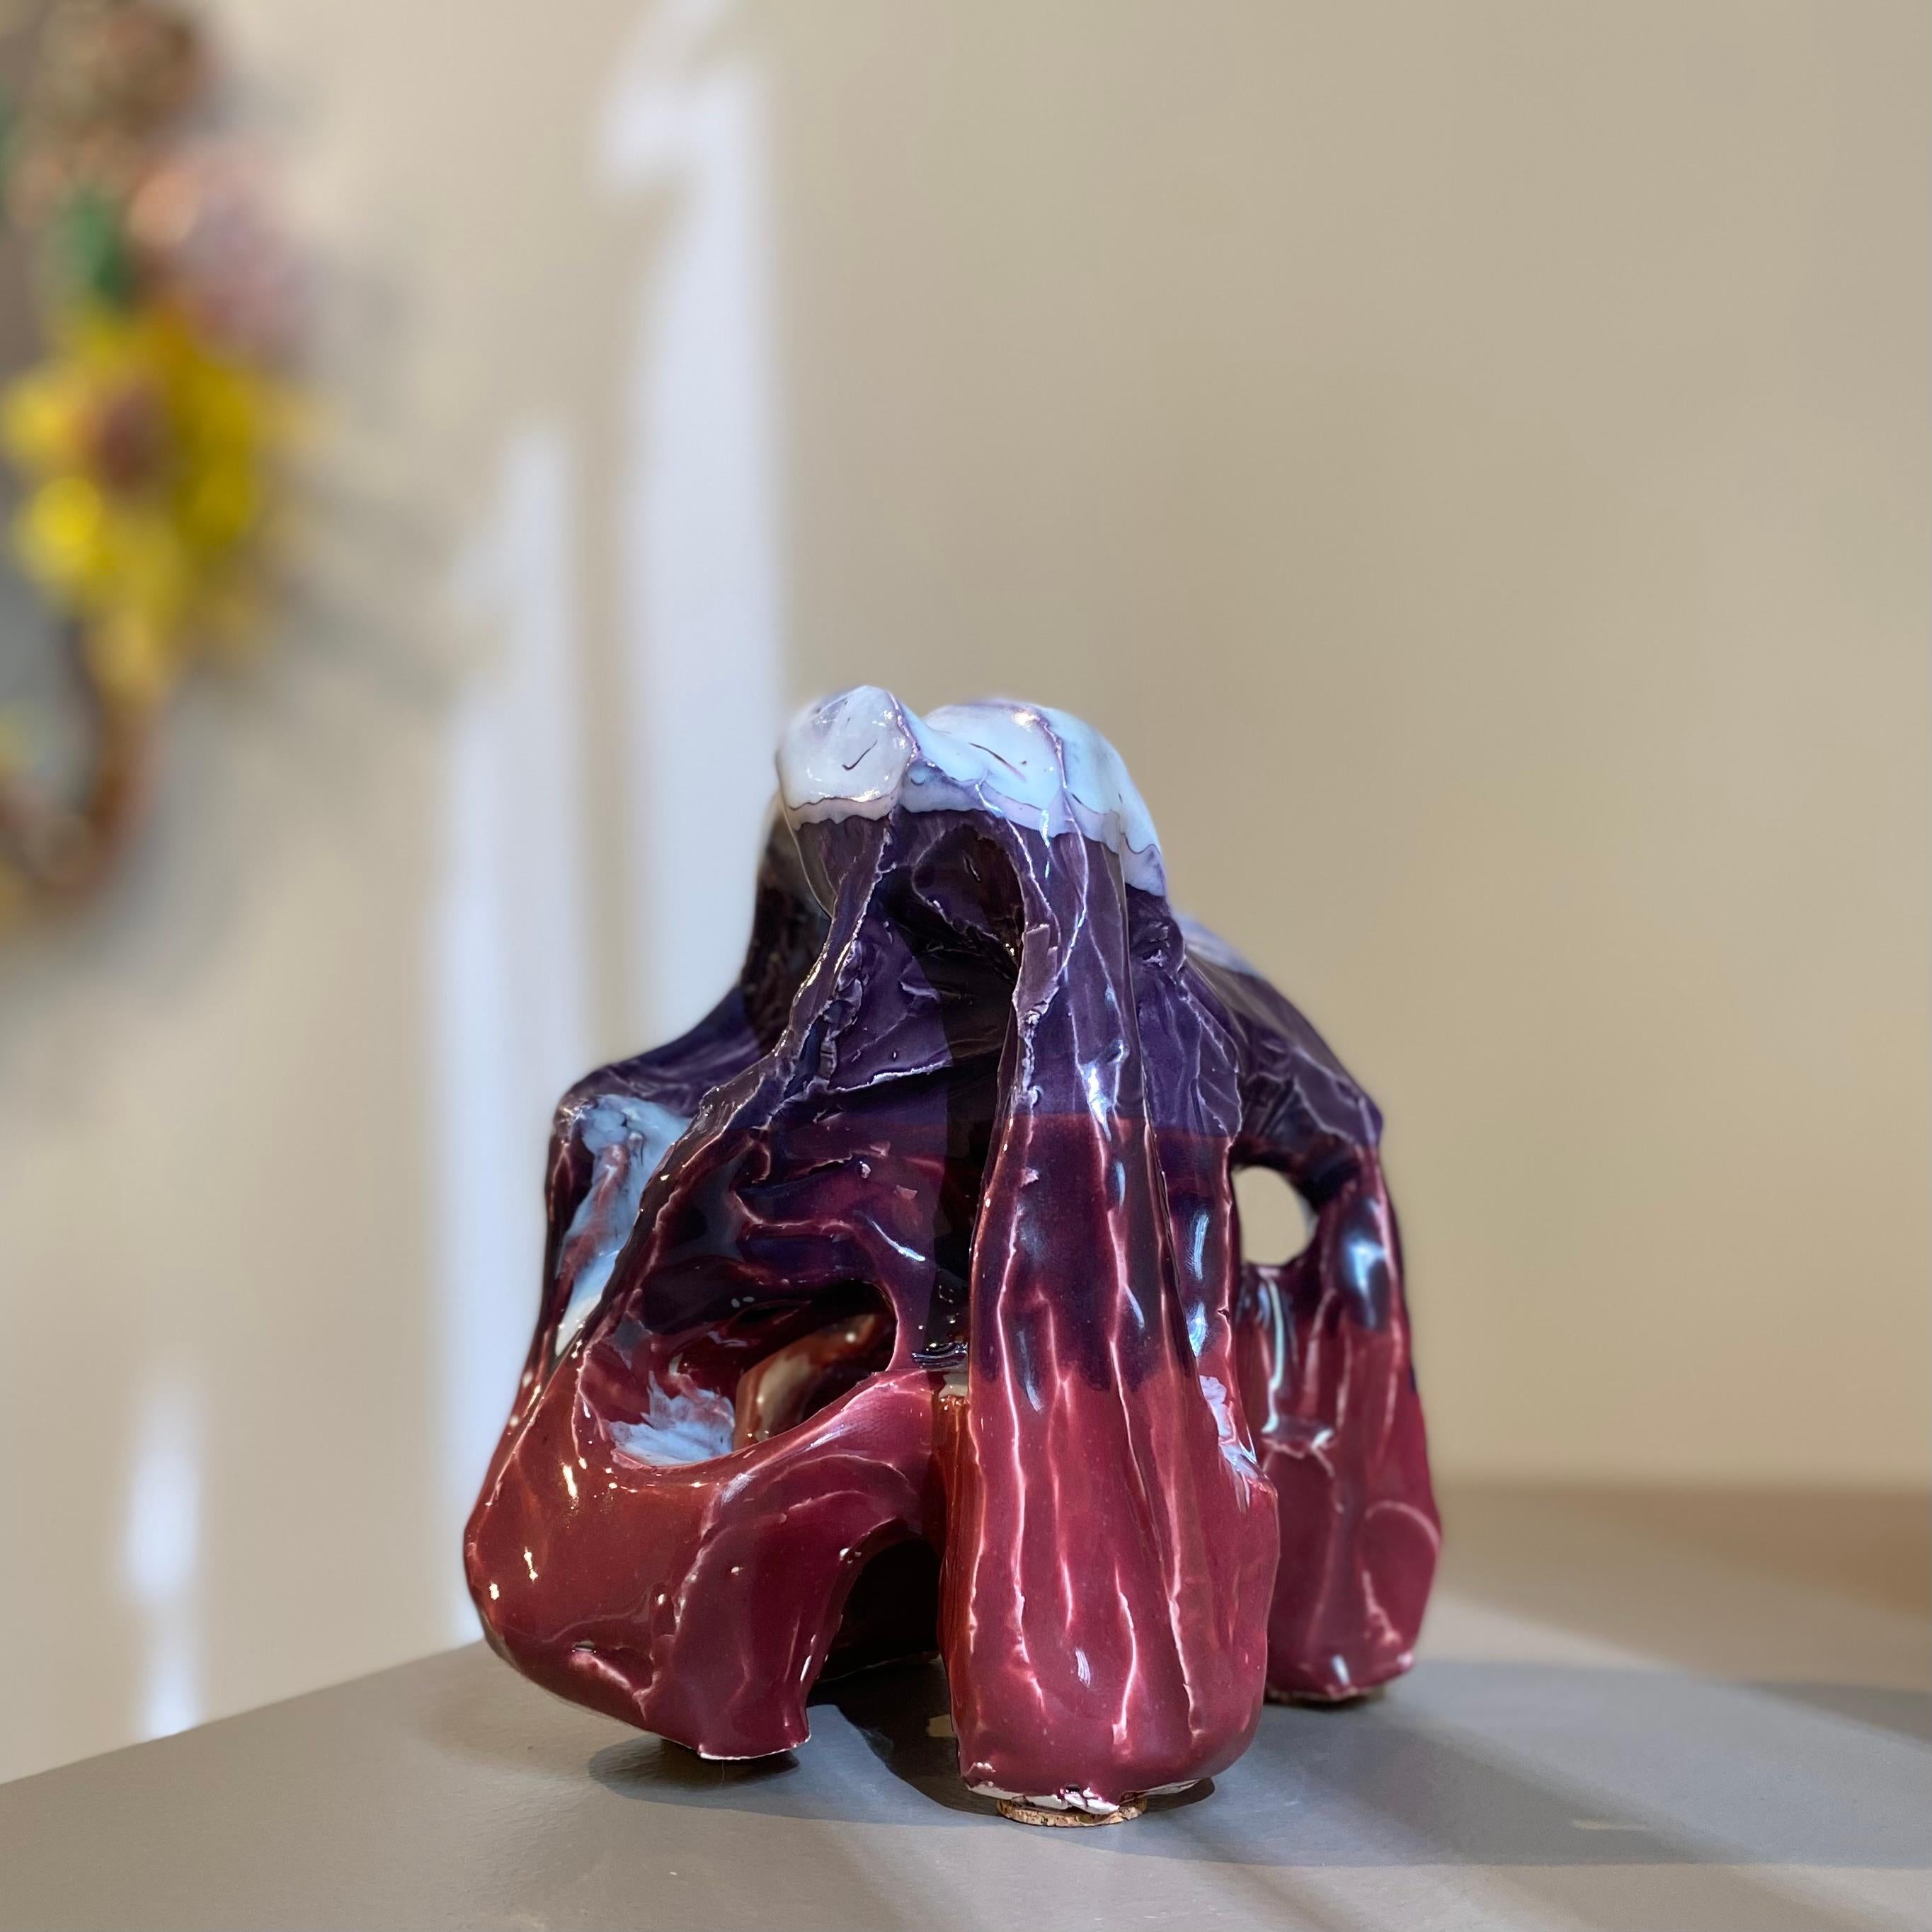 Contemporary ceramic tabletop sculpture hand-built of whiteware clay, and finished in a vibrant, glossy color-blocked glaze of deep purple and burgundy, topped by a pale violet and white ombré-like blend. A unique, hand-crafted decorative object